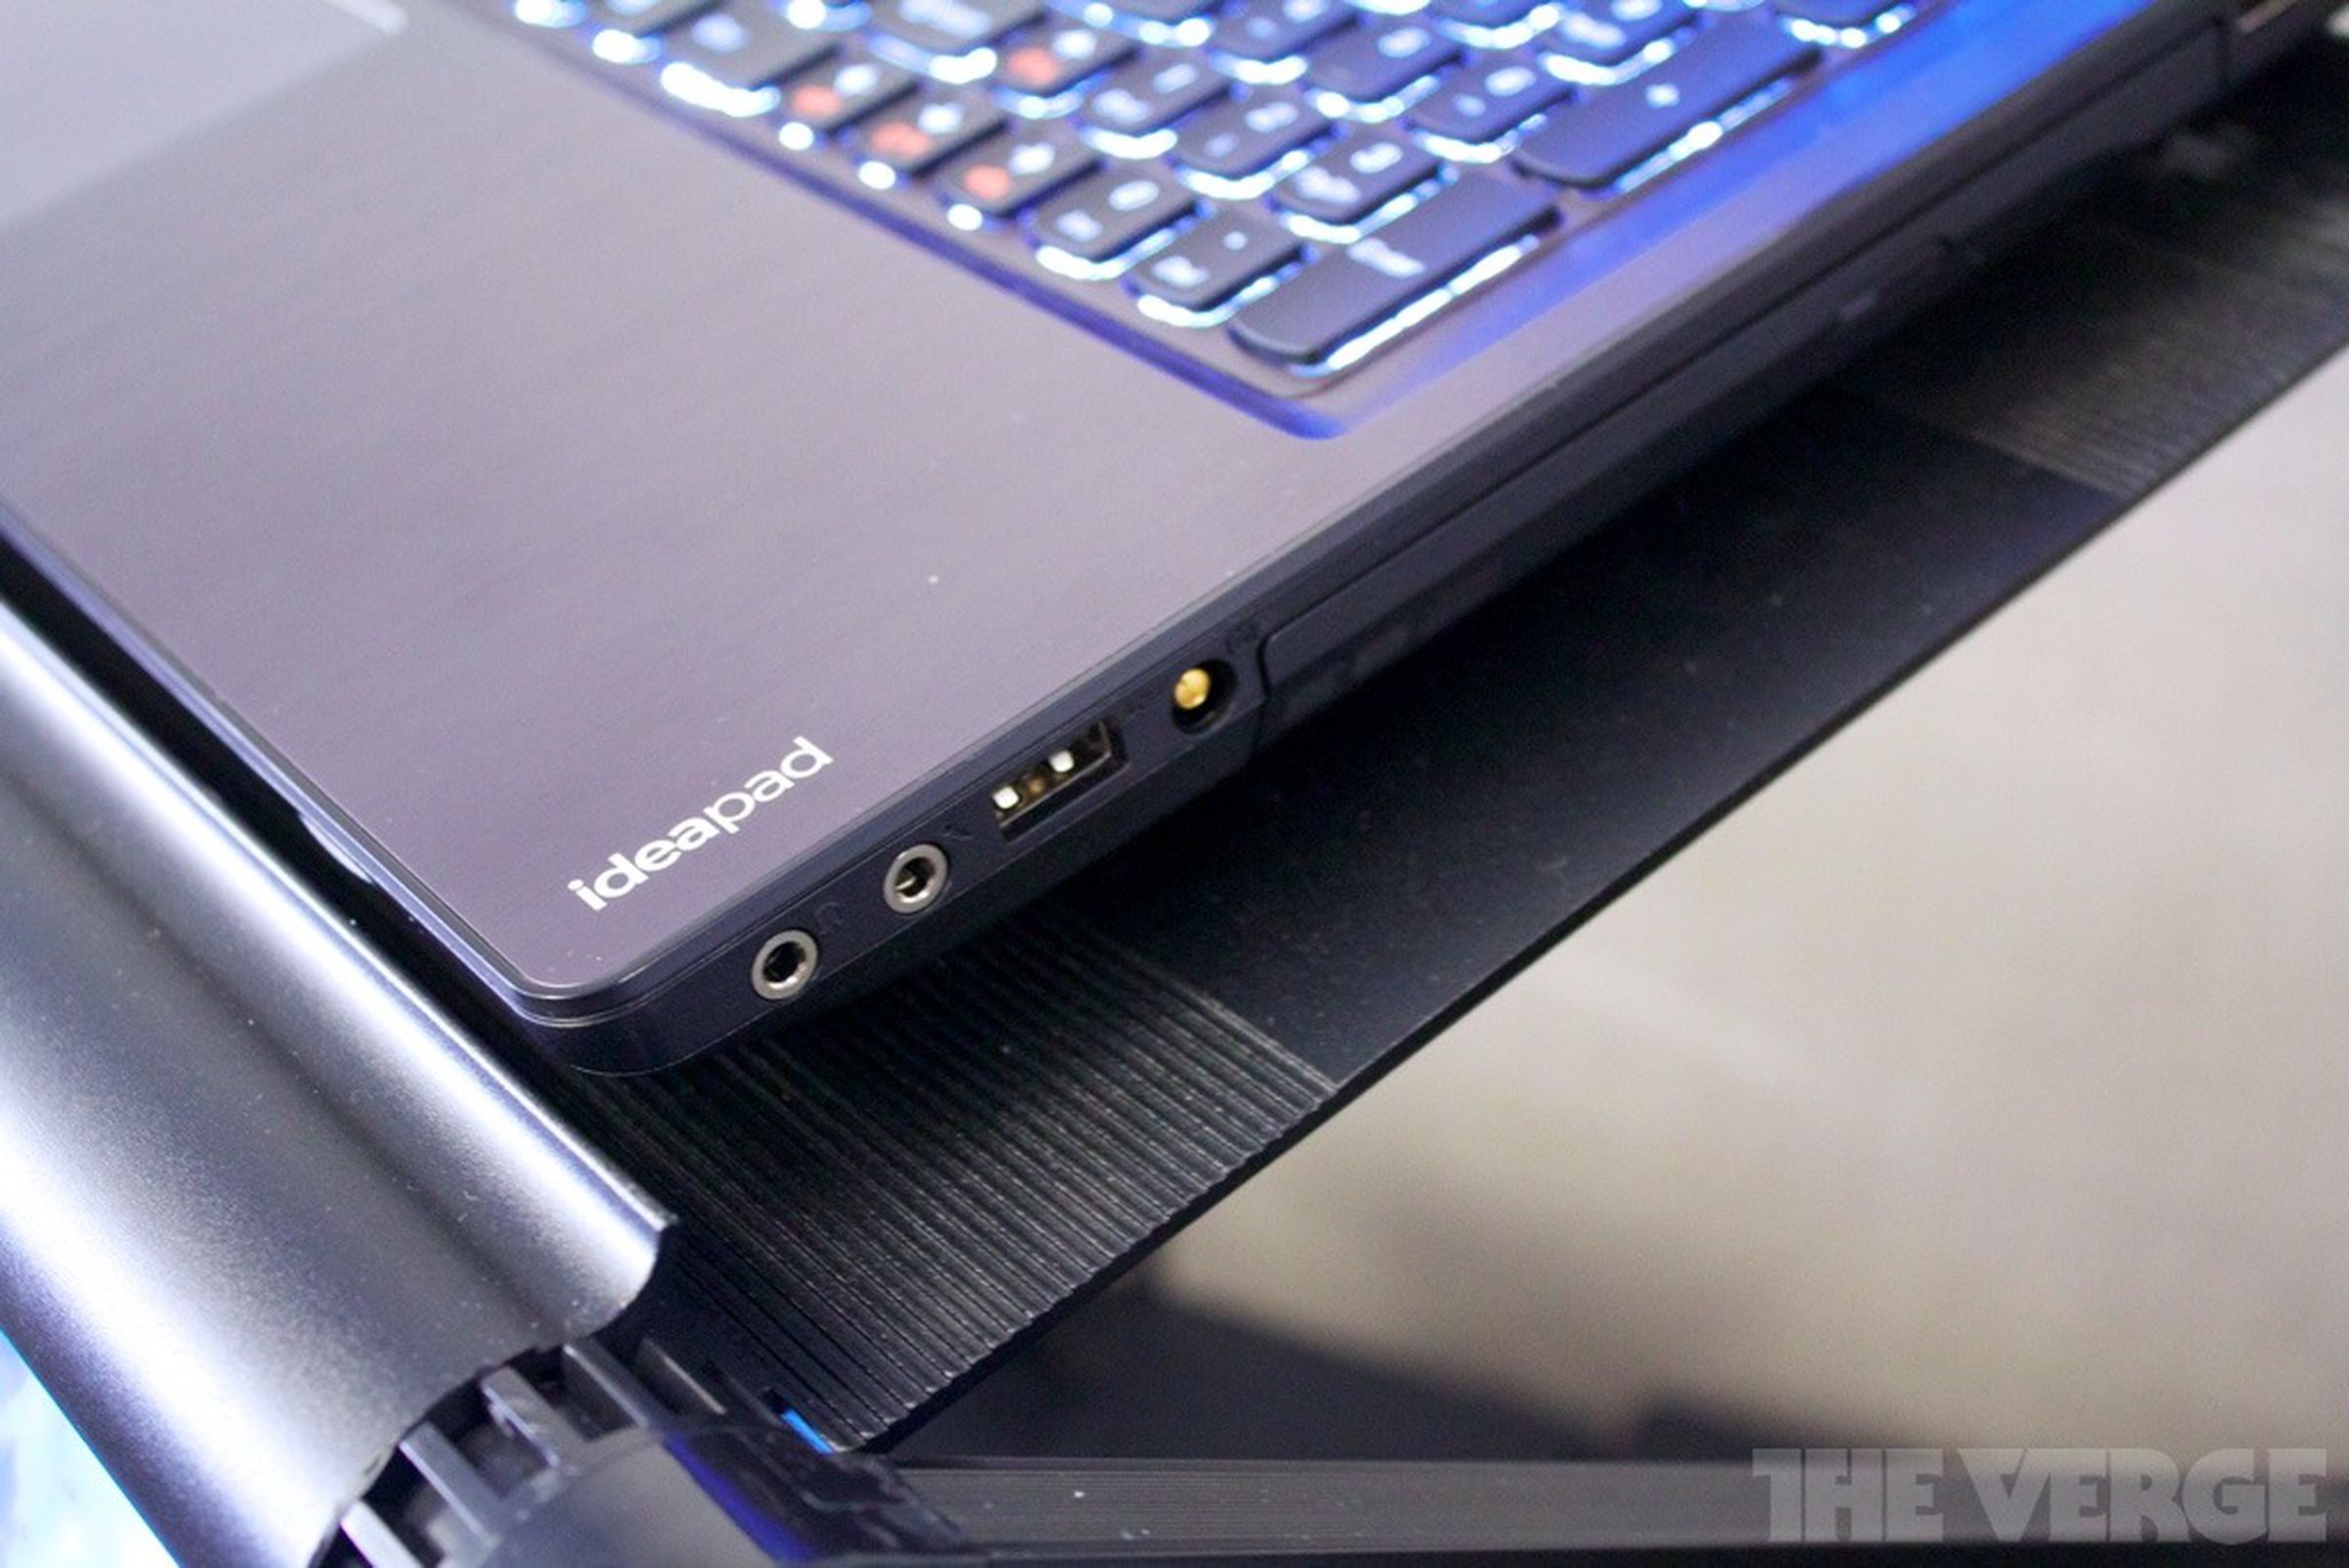 Lenovo IdeaPad U310, U410, Y480 and Z580 hands-on pictures